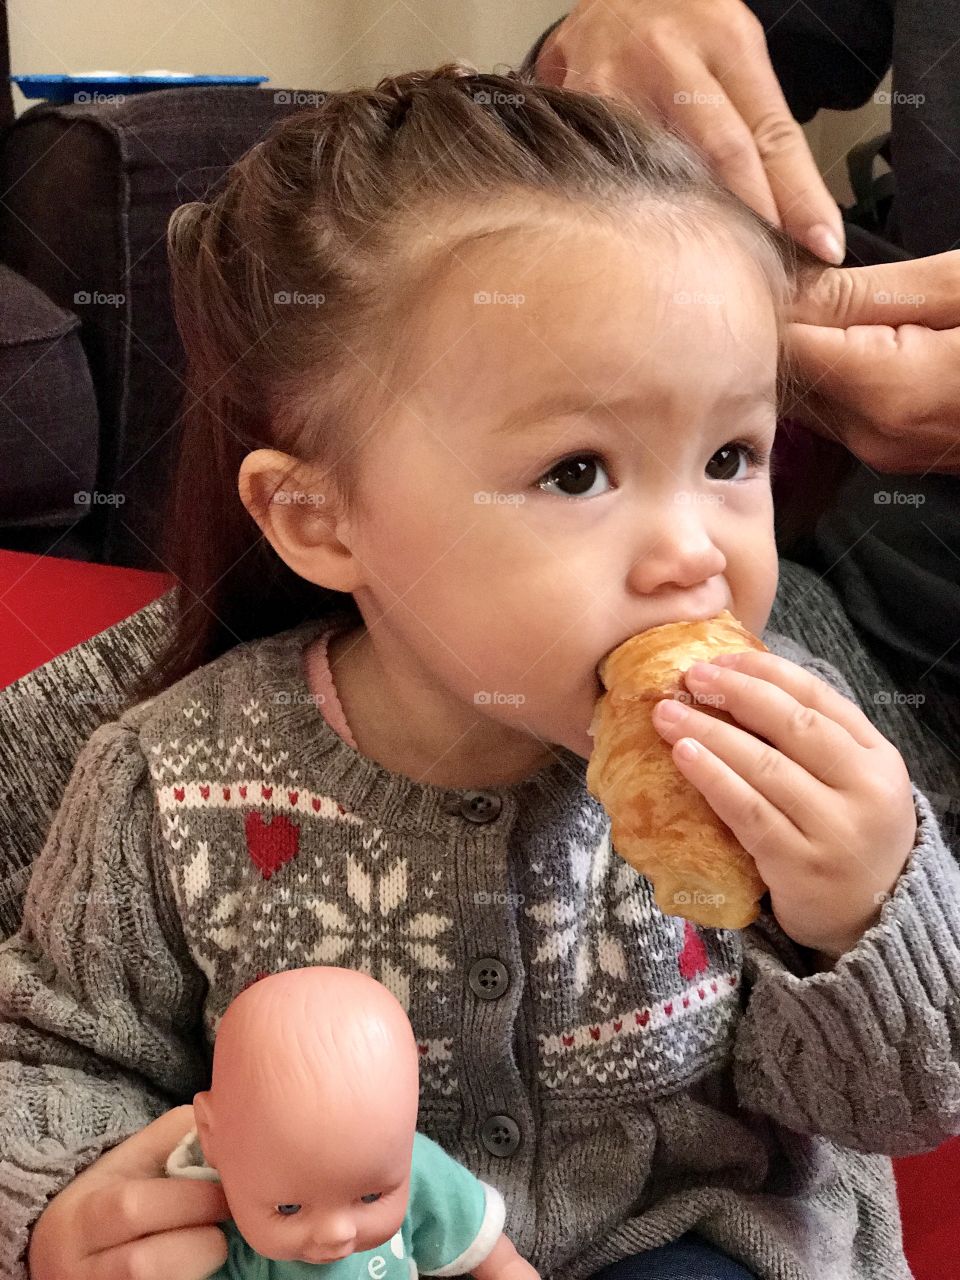 Baby eating croissant and getting hair done